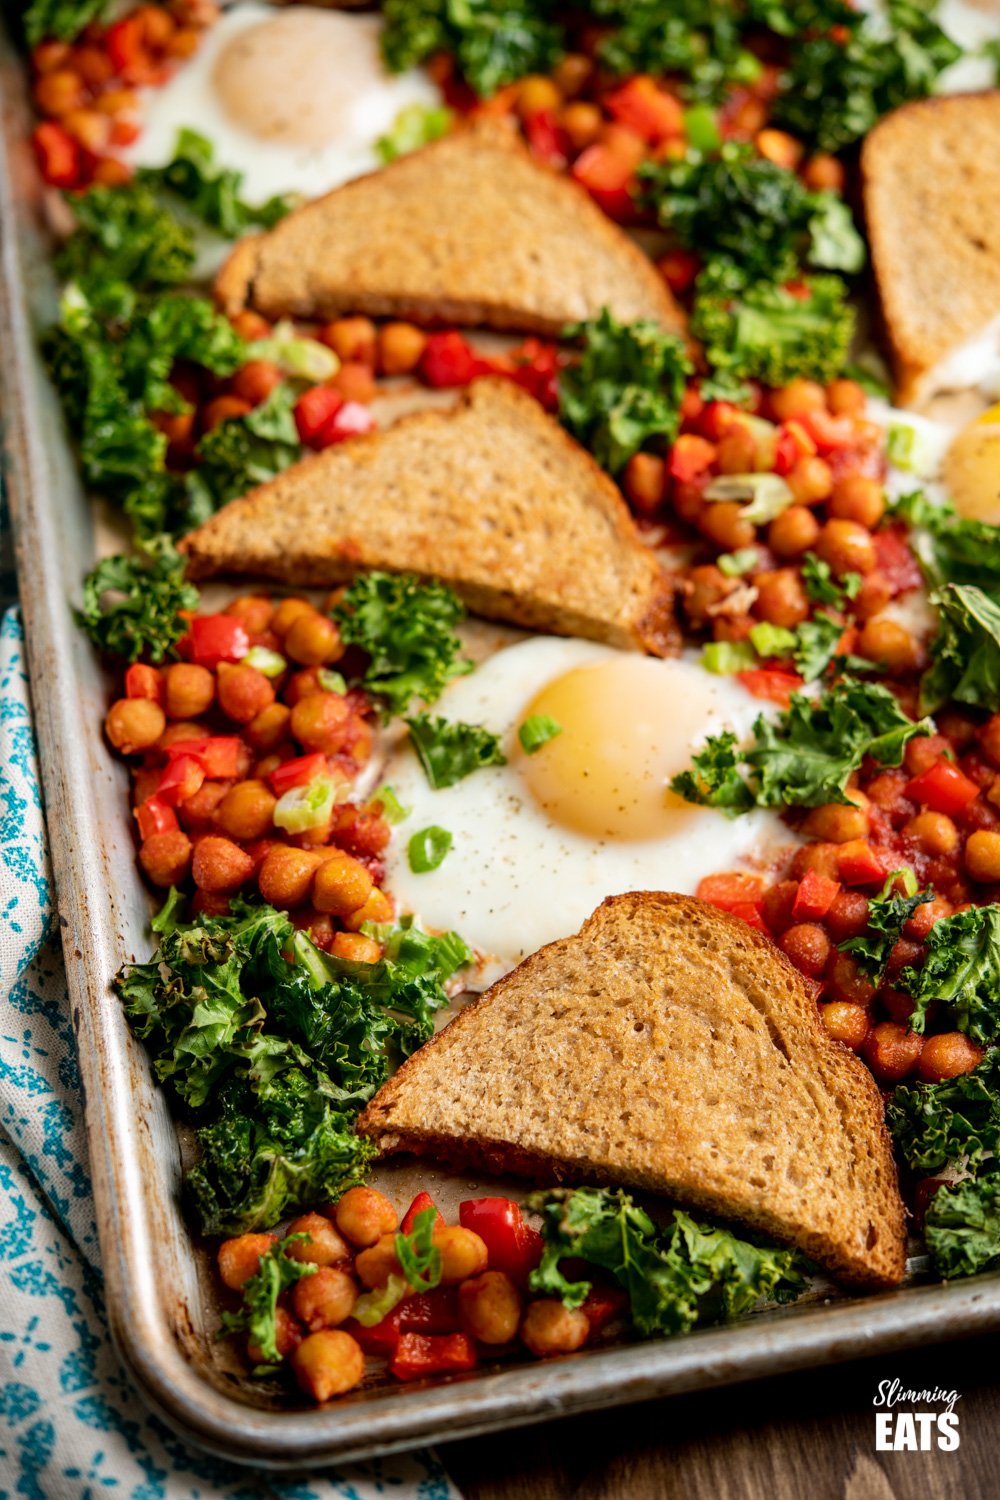 chickpea, egg and kale with crispy whole wheat toast on baking tray